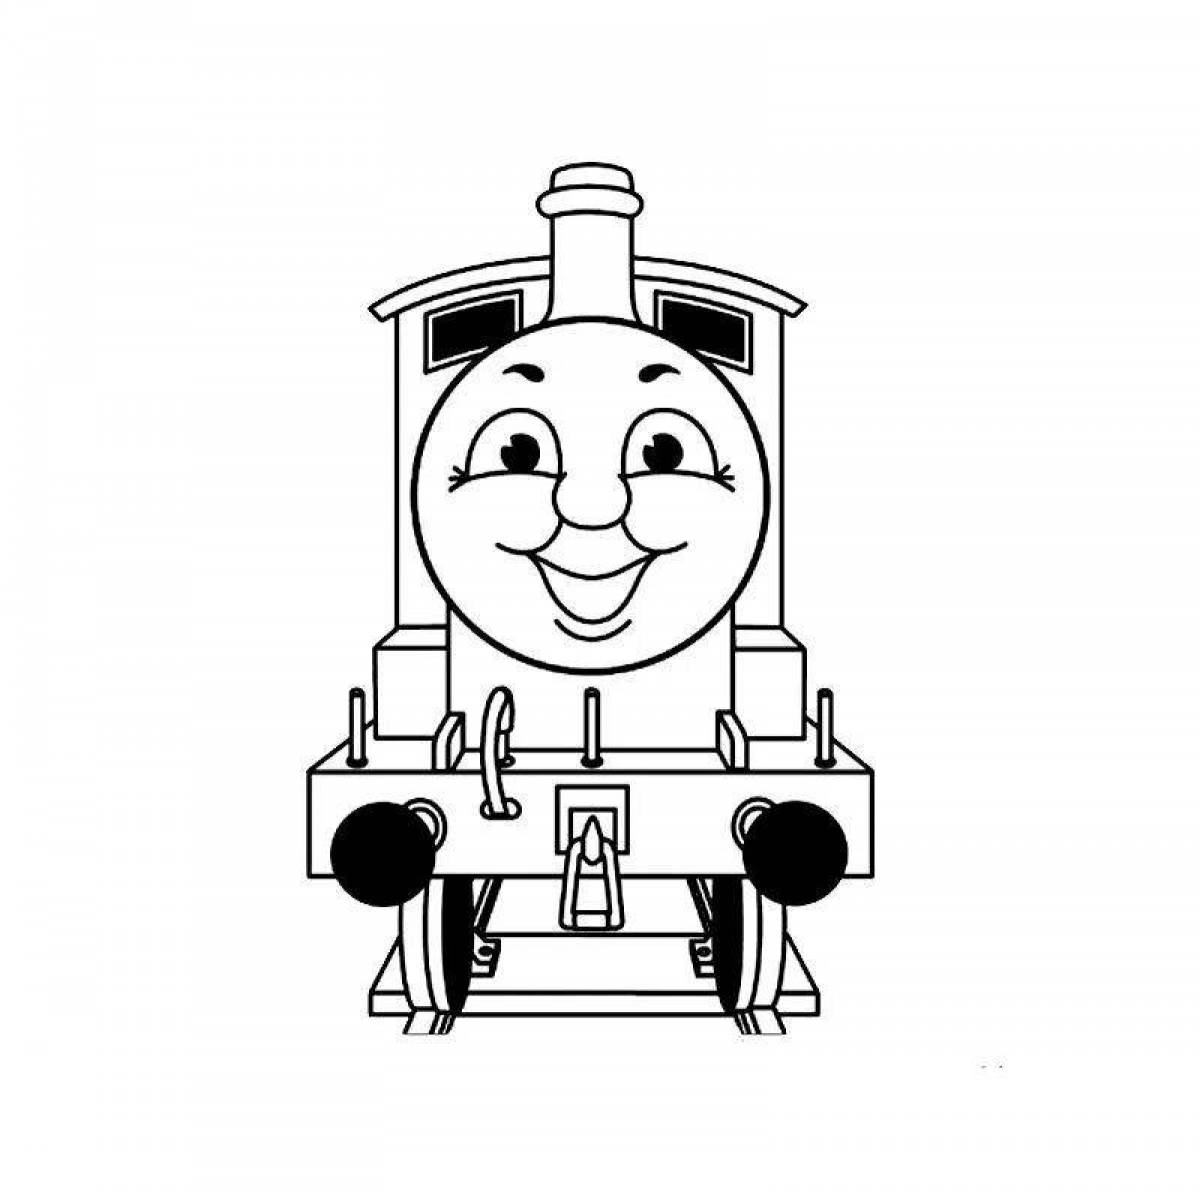 Thomas the Tank Engine coloring book full of color